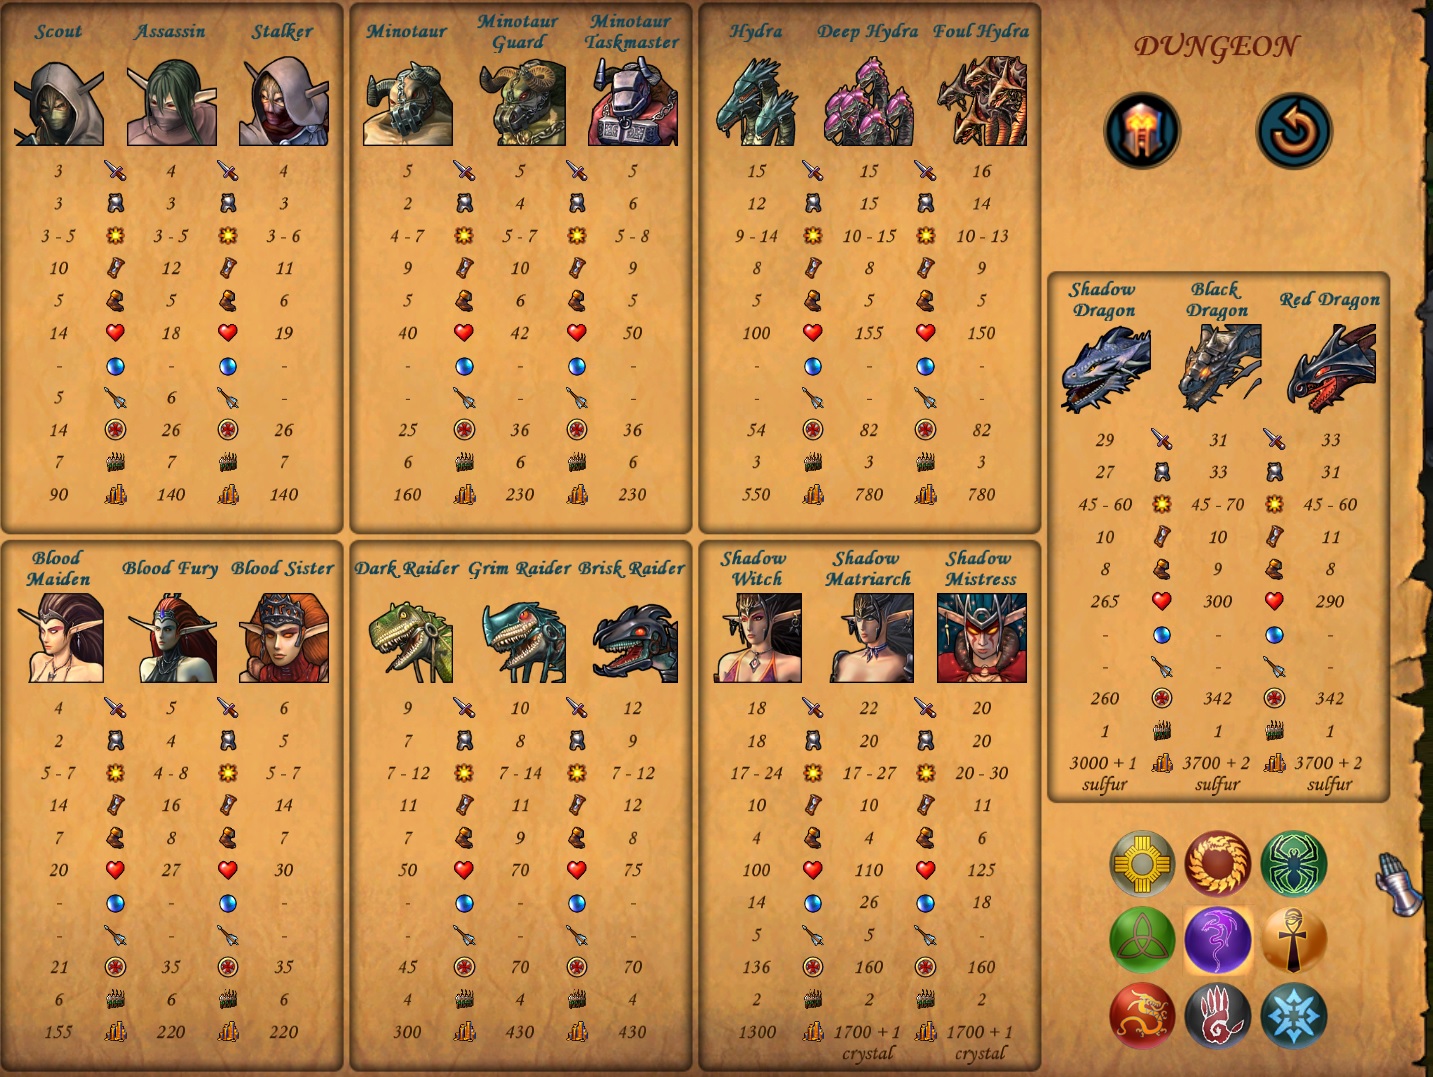 heroes of might and magic 5 skill